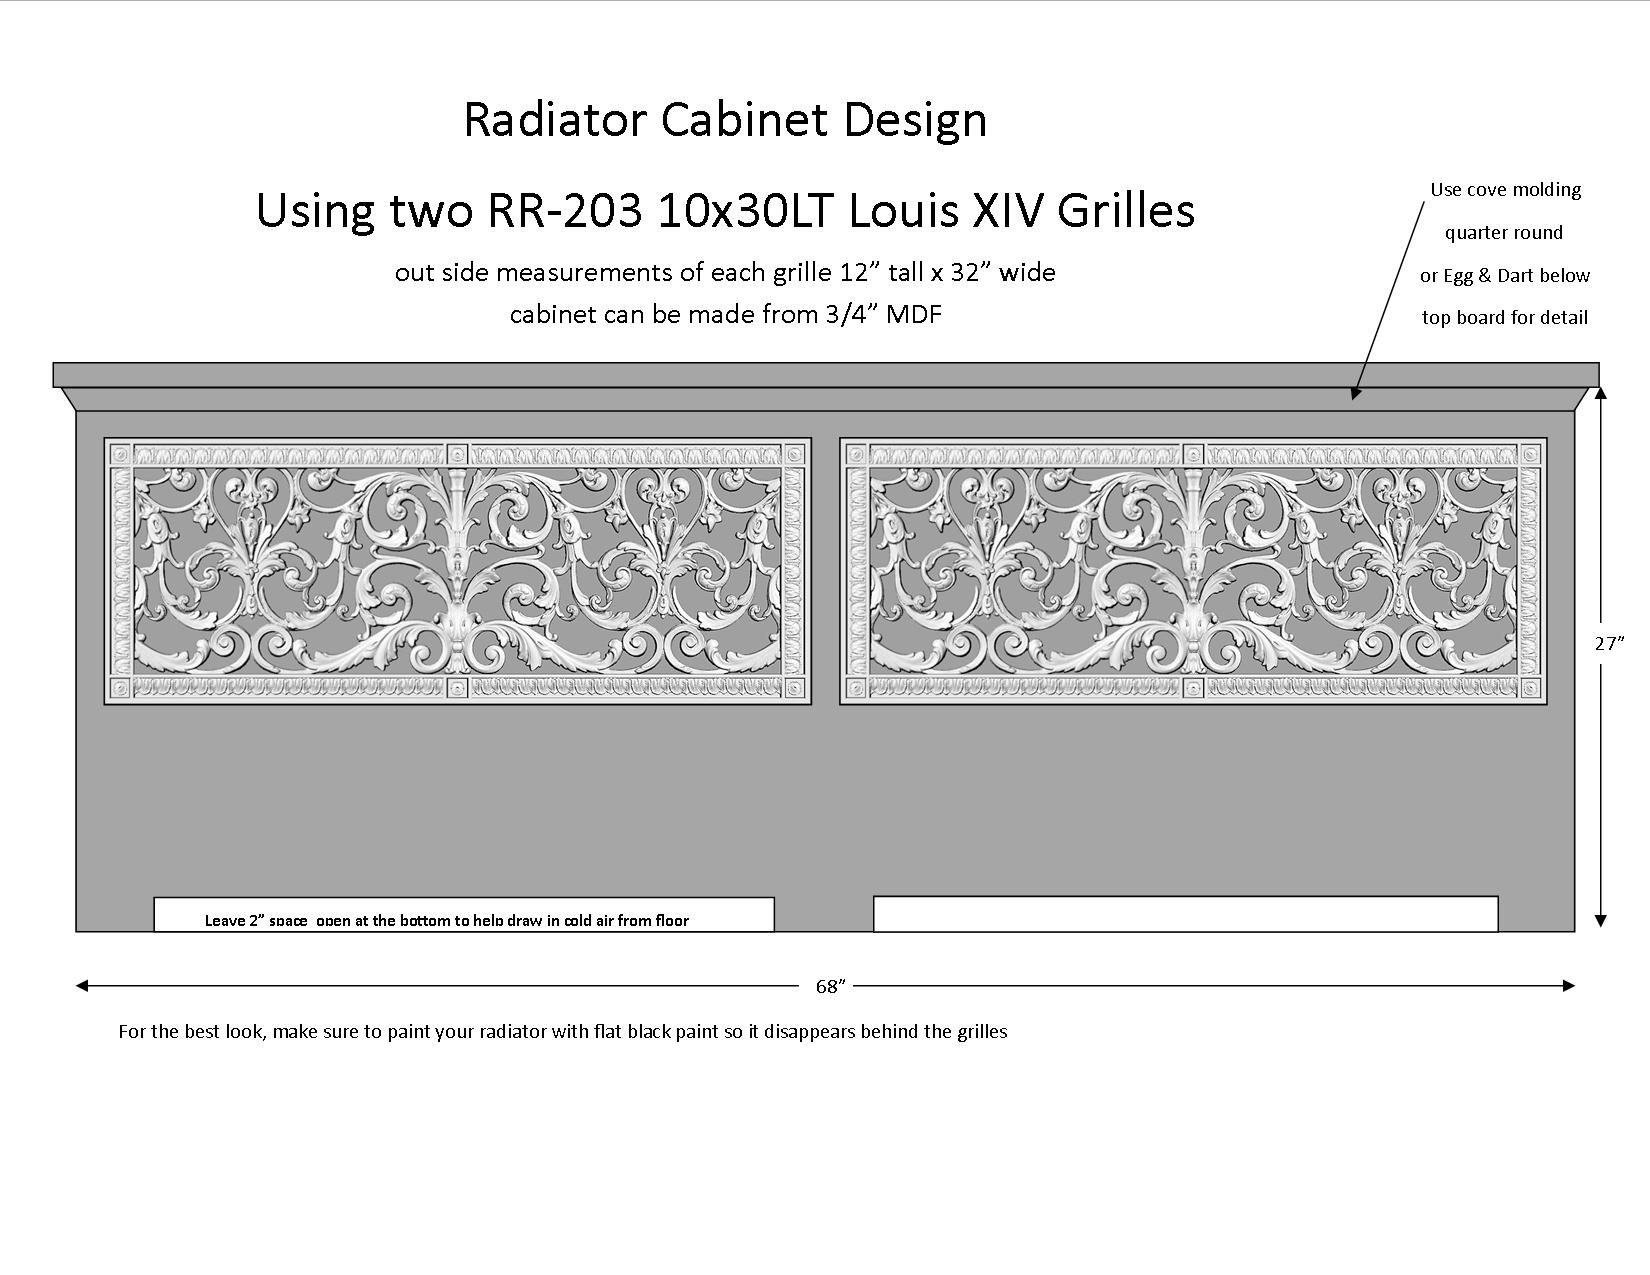 Radiator Cover Design with 2 10" x 30" decorative radiator cover grilles